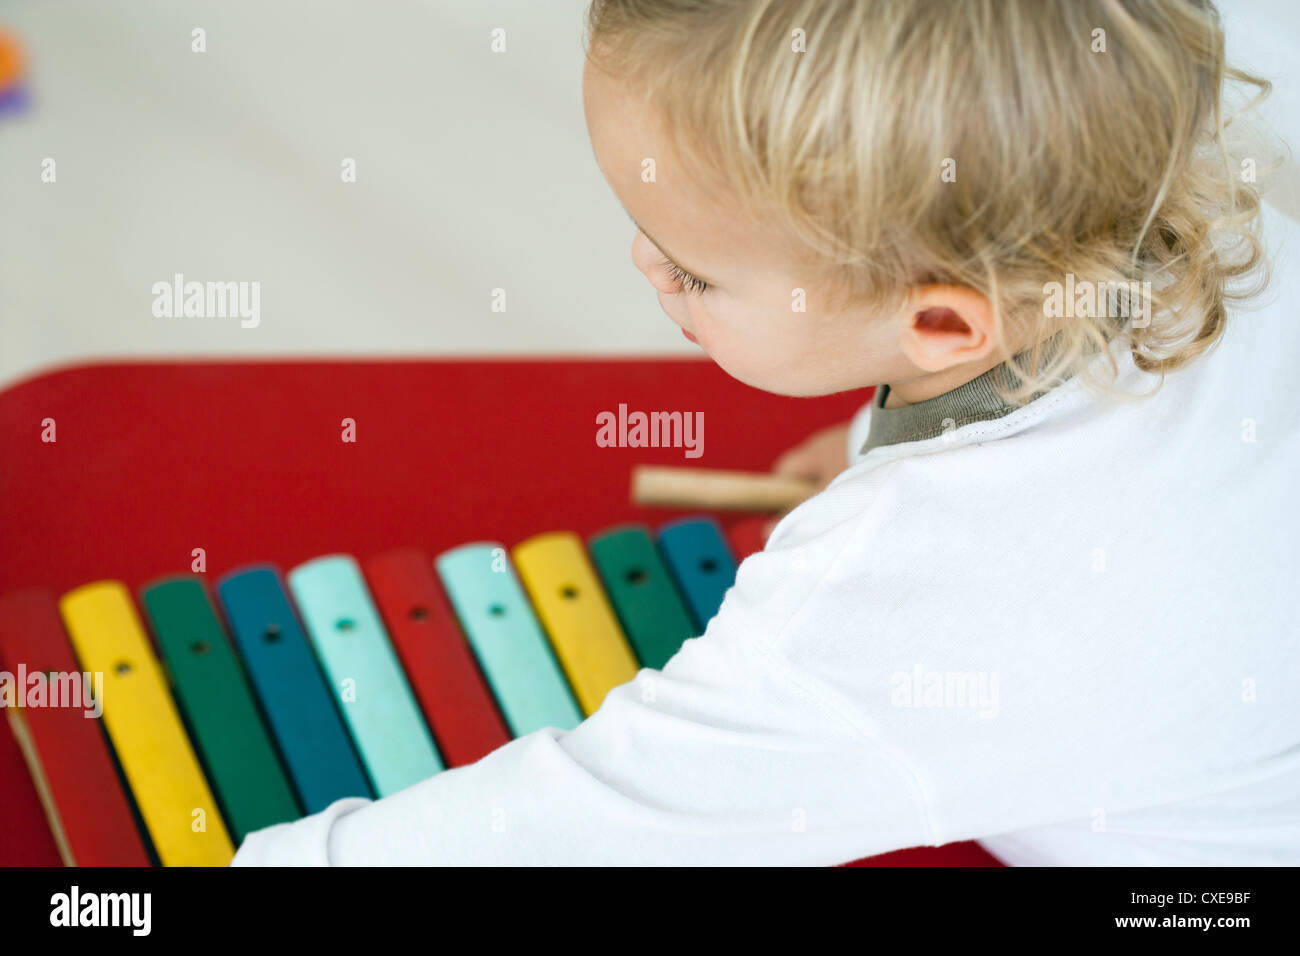 Baby boy with toy xylophone, high angle view Stock Photo